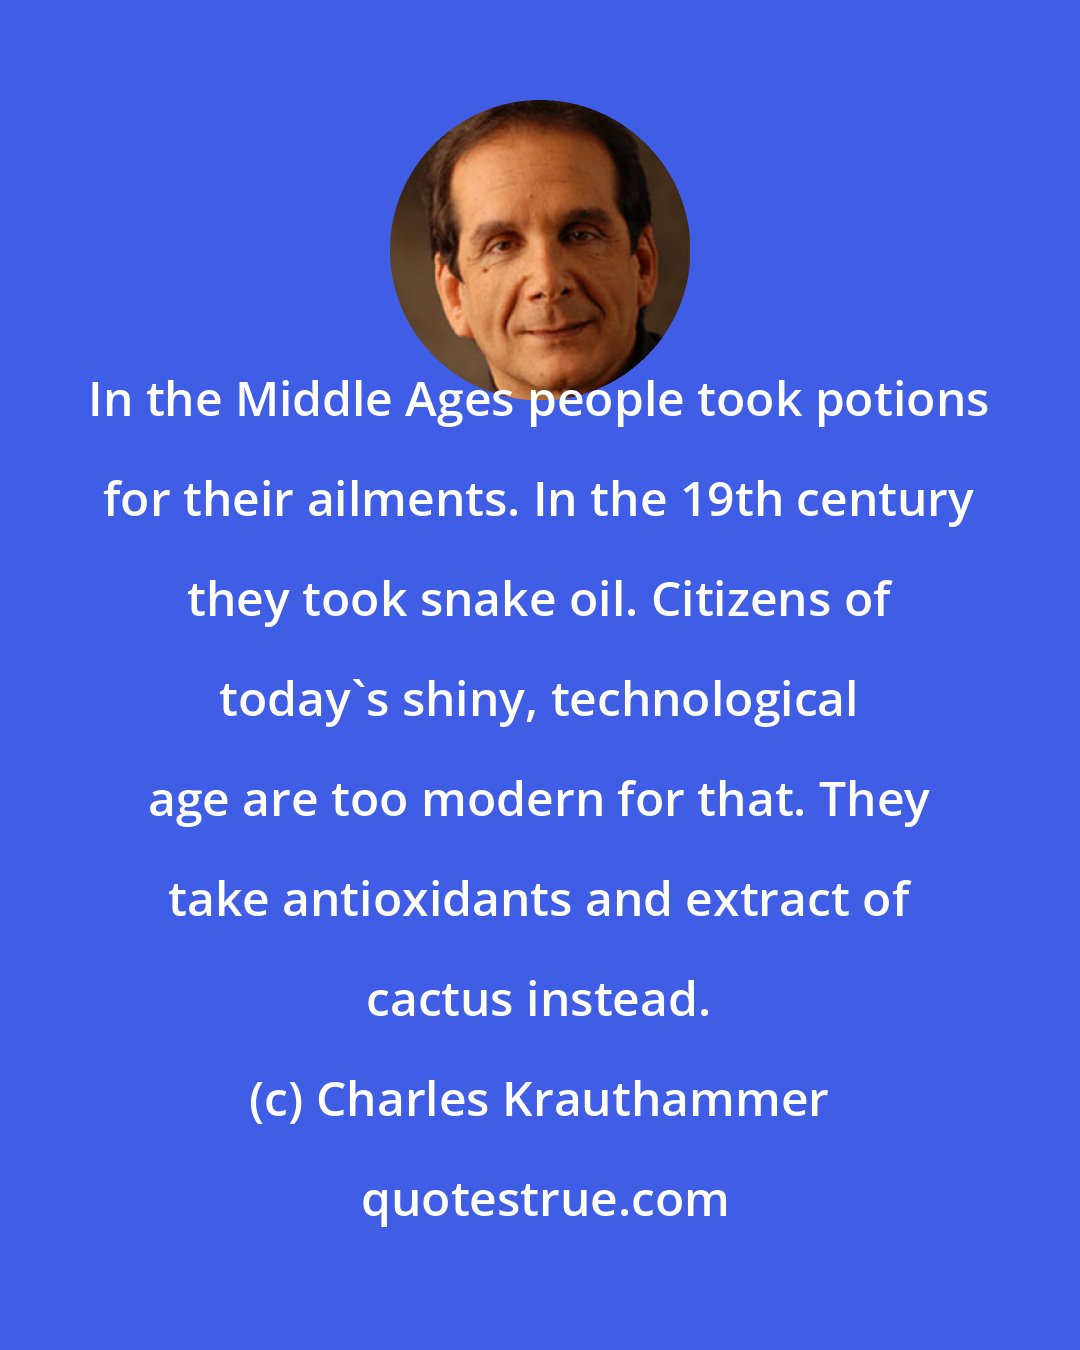 Charles Krauthammer: In the Middle Ages people took potions for their ailments. In the 19th century they took snake oil. Citizens of today's shiny, technological age are too modern for that. They take antioxidants and extract of cactus instead.